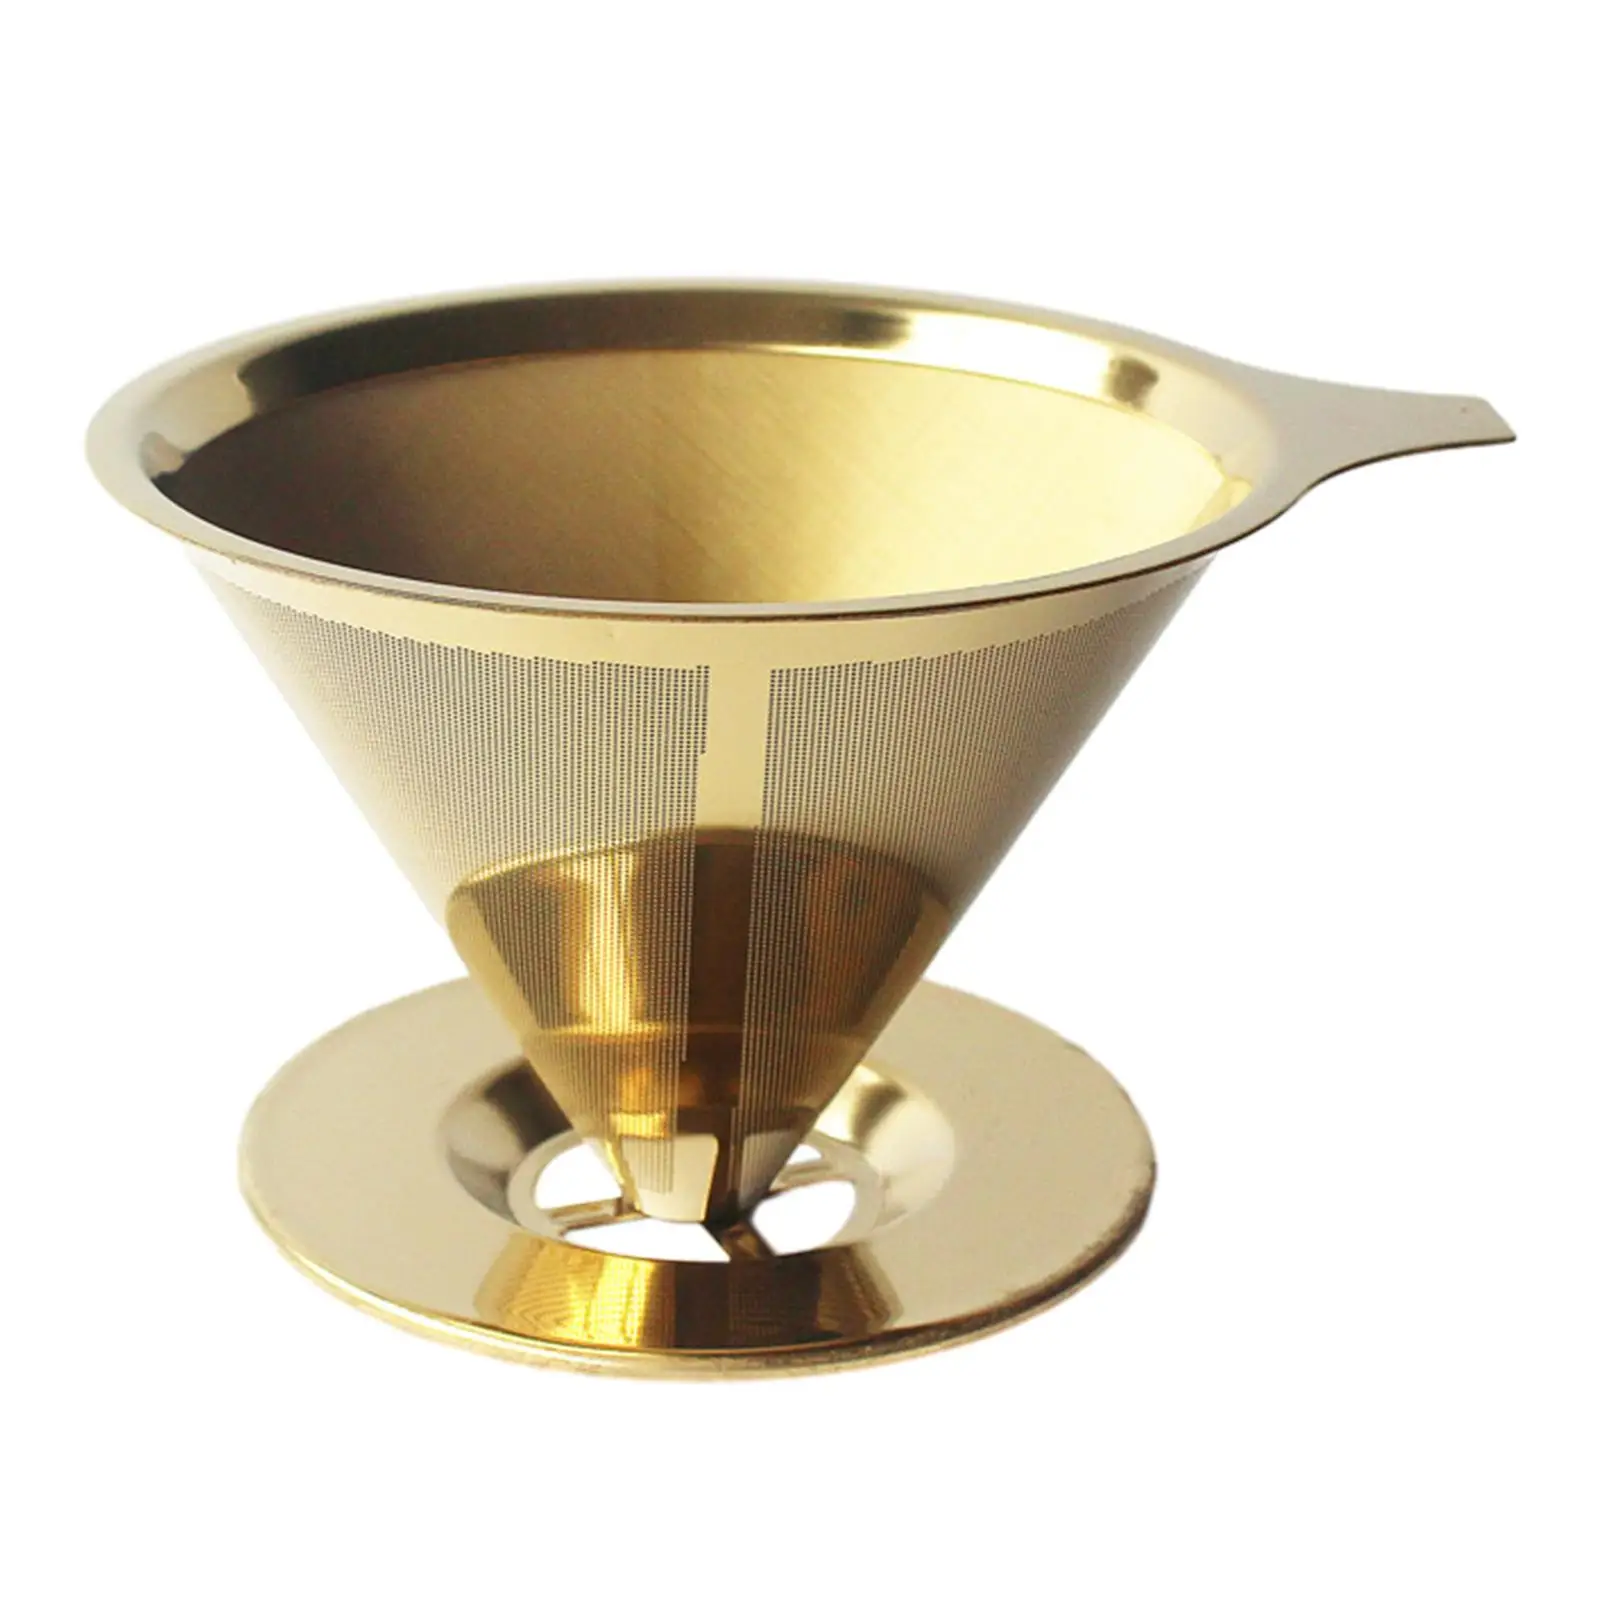 Stainless Steel Coffee Filter Pour over Coffee for Restaurant Travel Camping